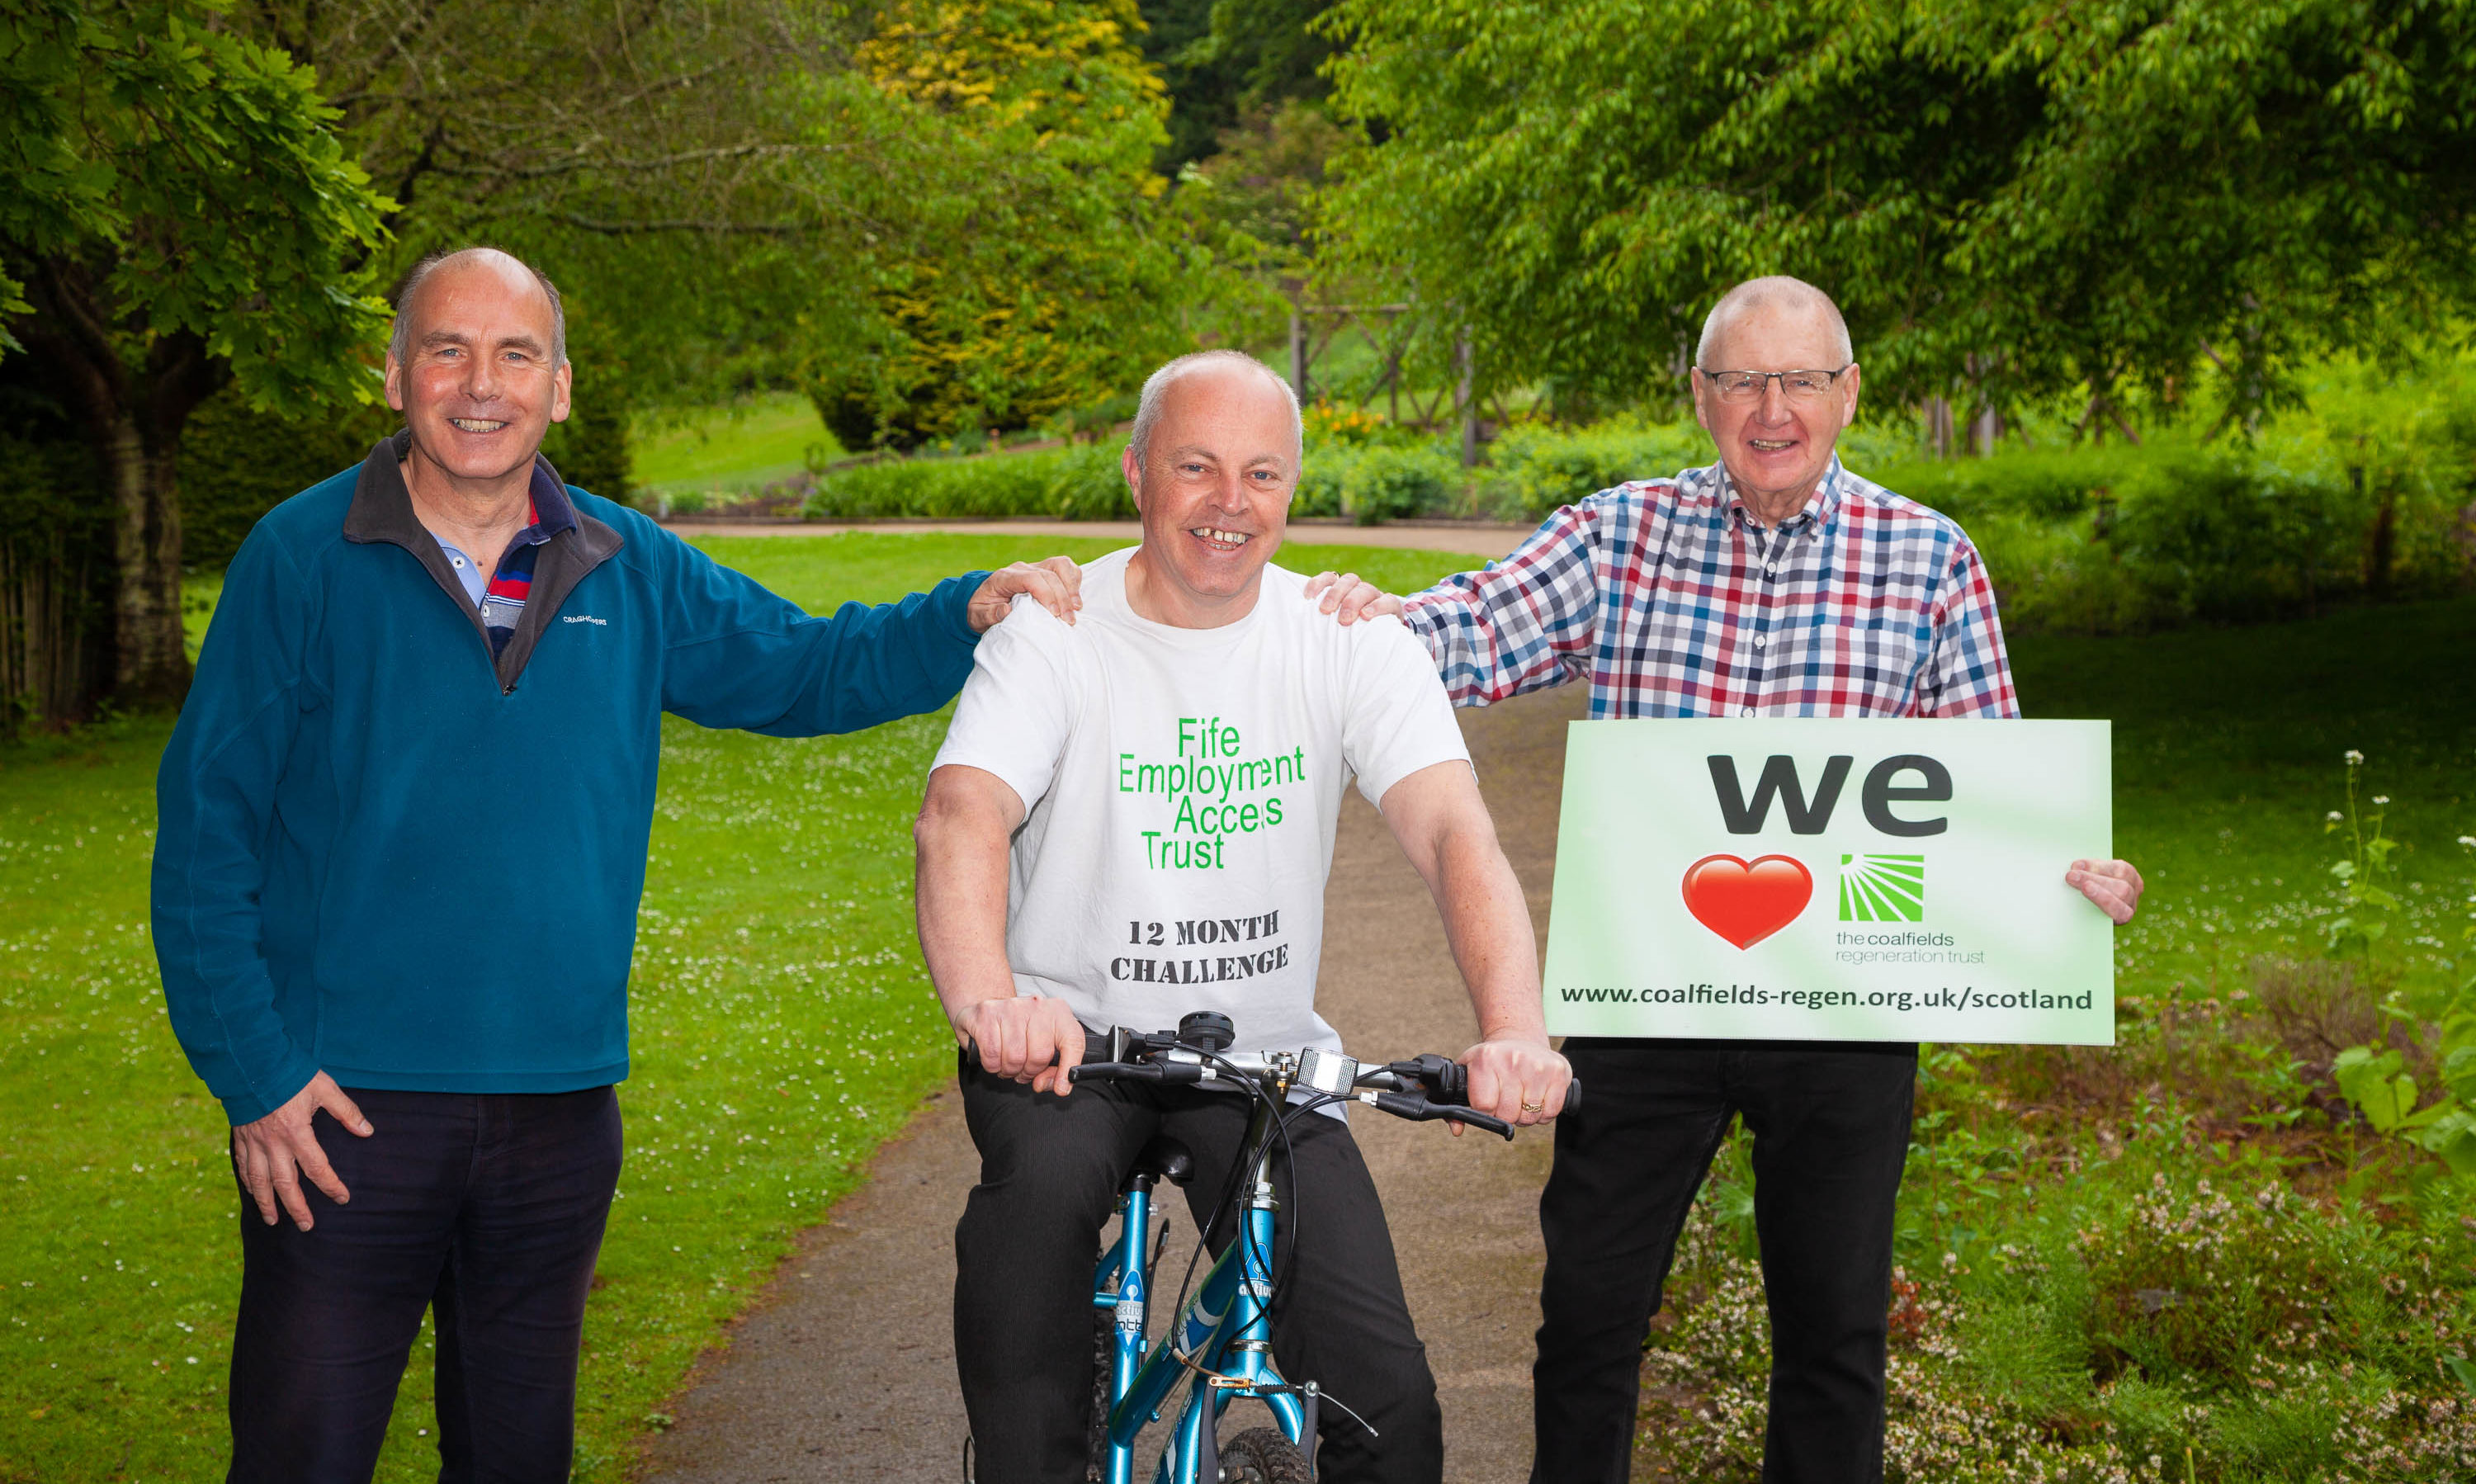 Brian, left, with Duncan Mitchell, centre. and Bob Young from the Coalfields Regeneration Trust.